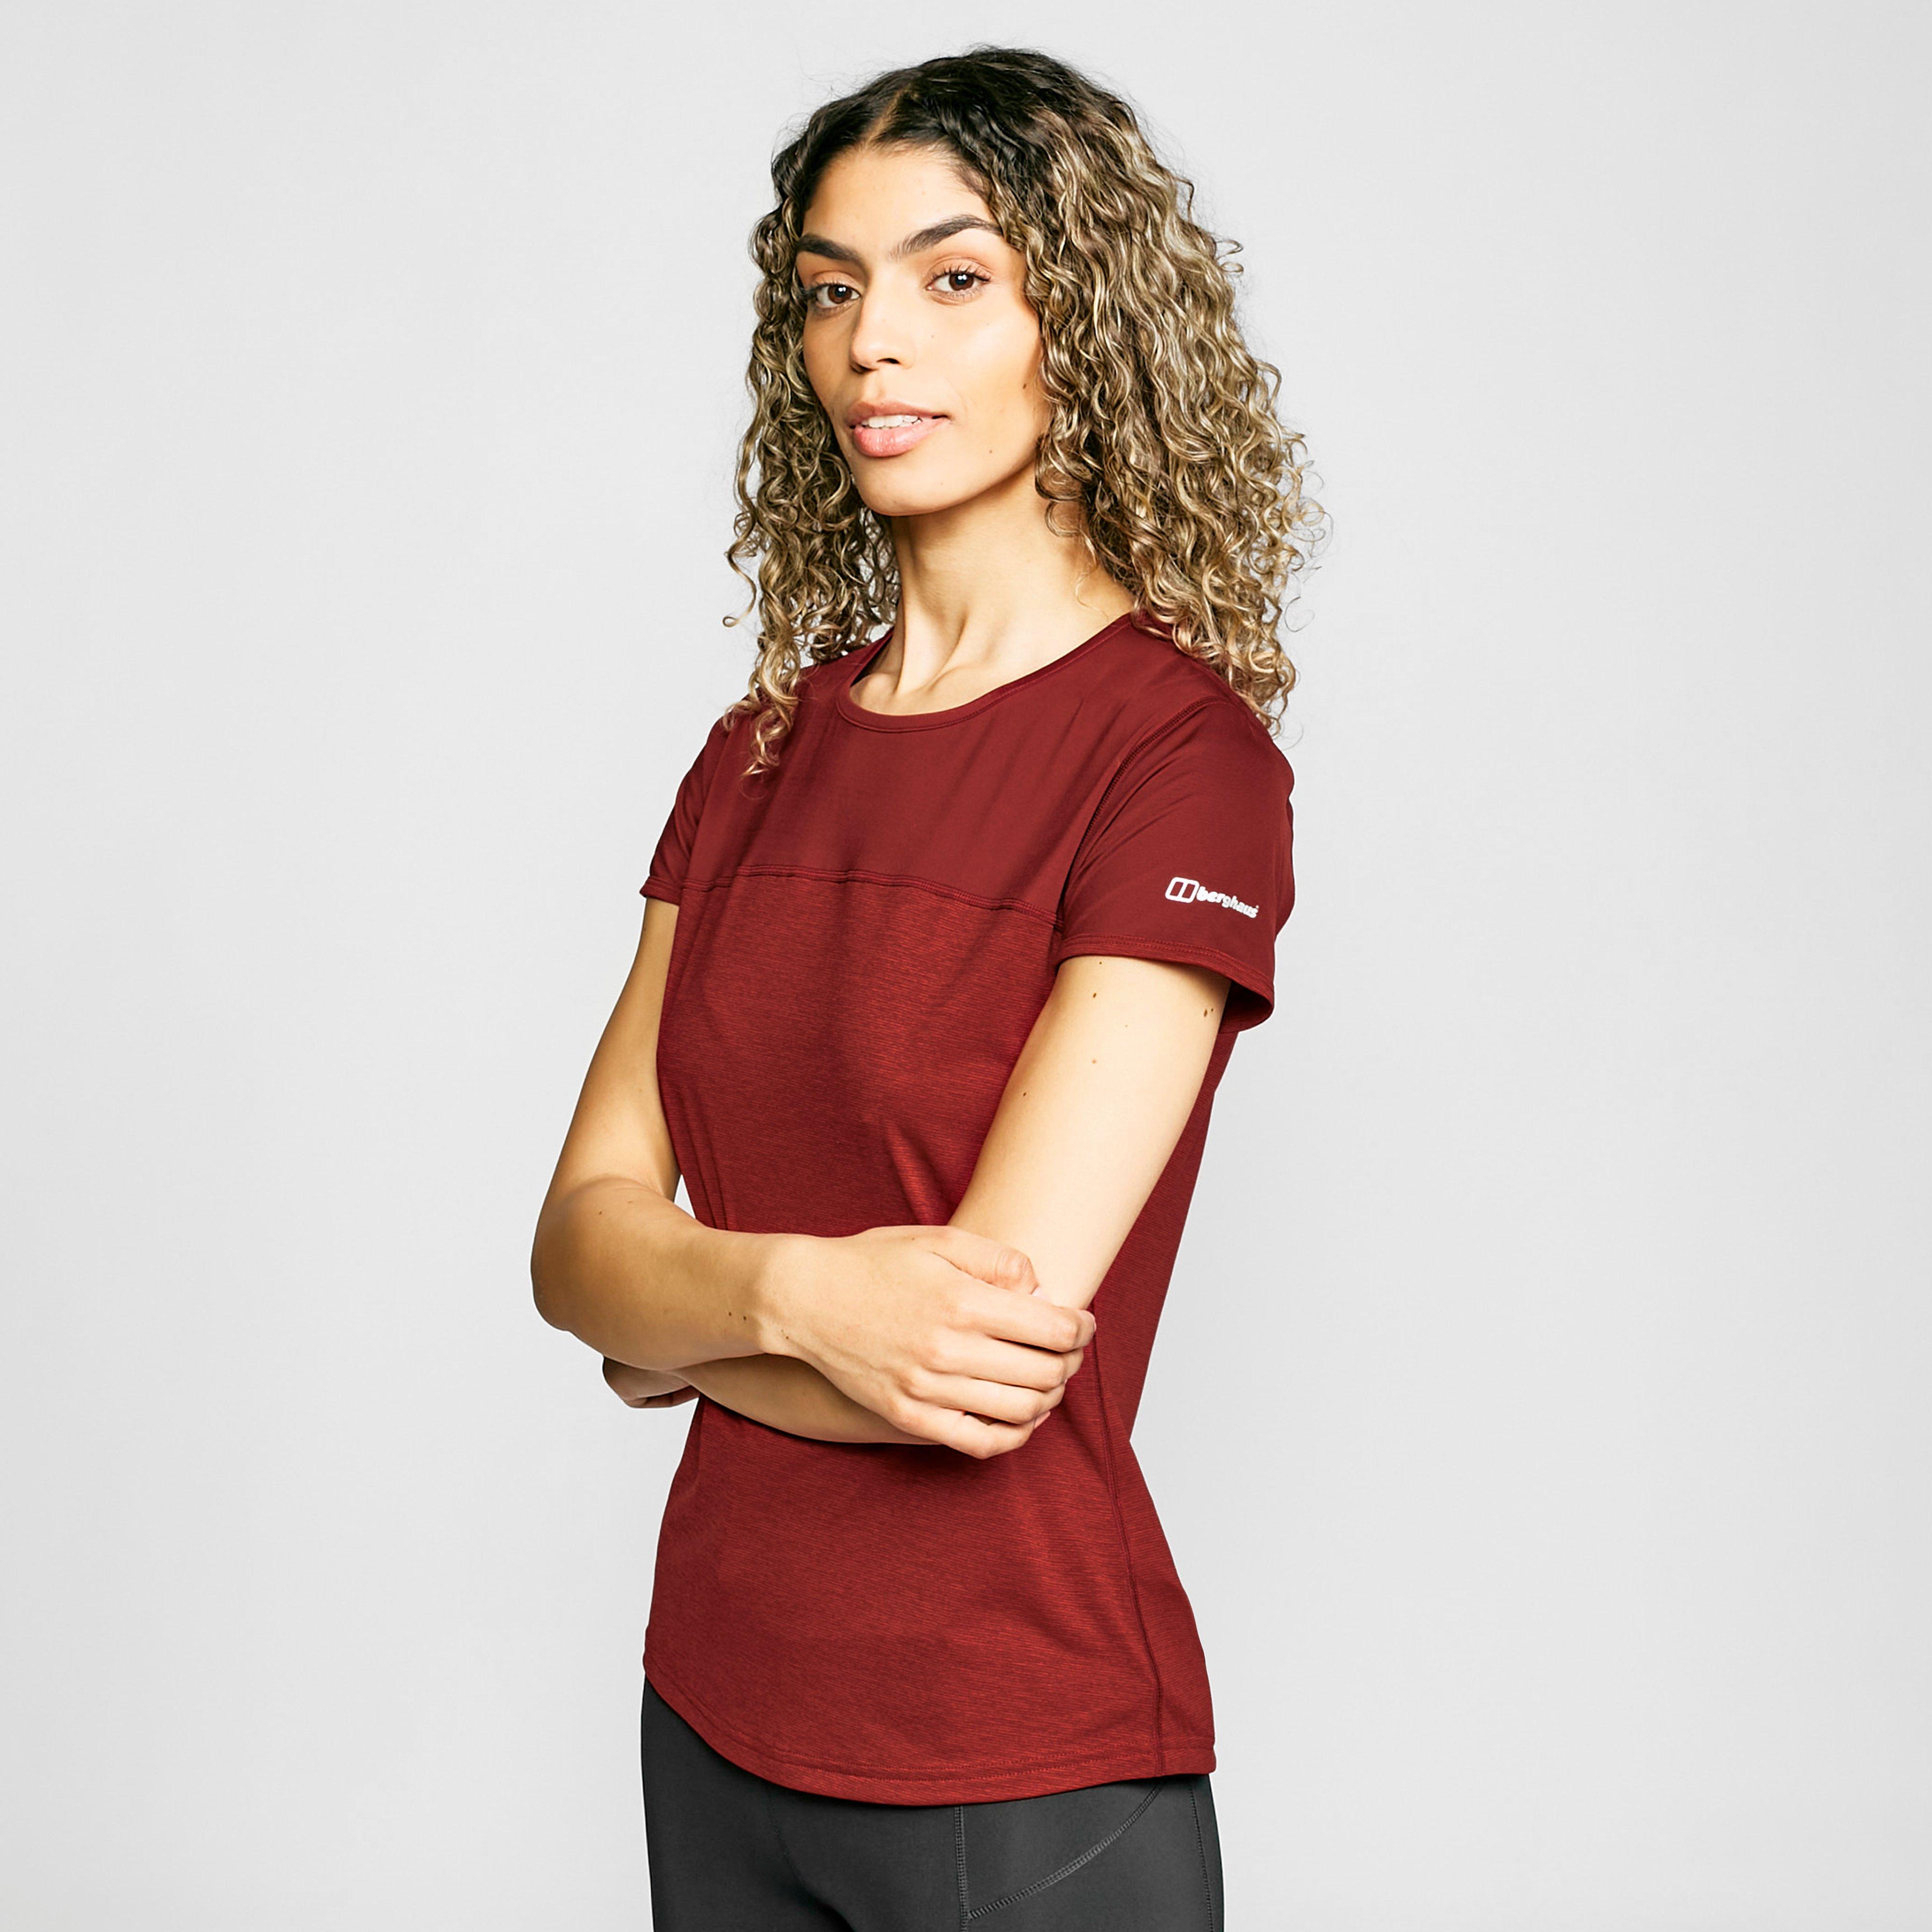 Berghaus Womens Voyager Tech Tee - Red/red  Red/red